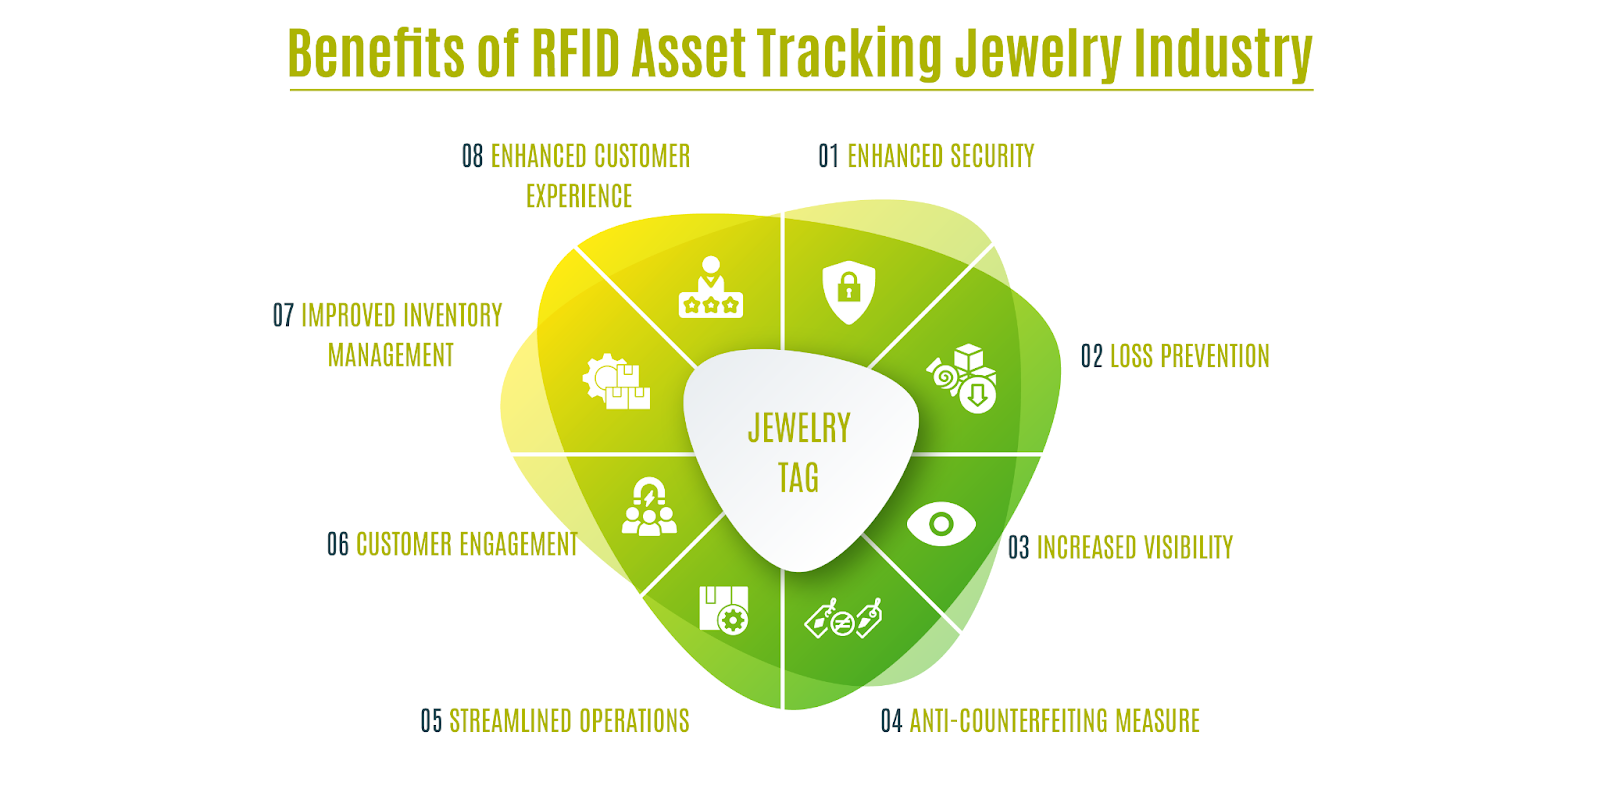 Benefits of RFID Asset Tracking in Jewelry Industry